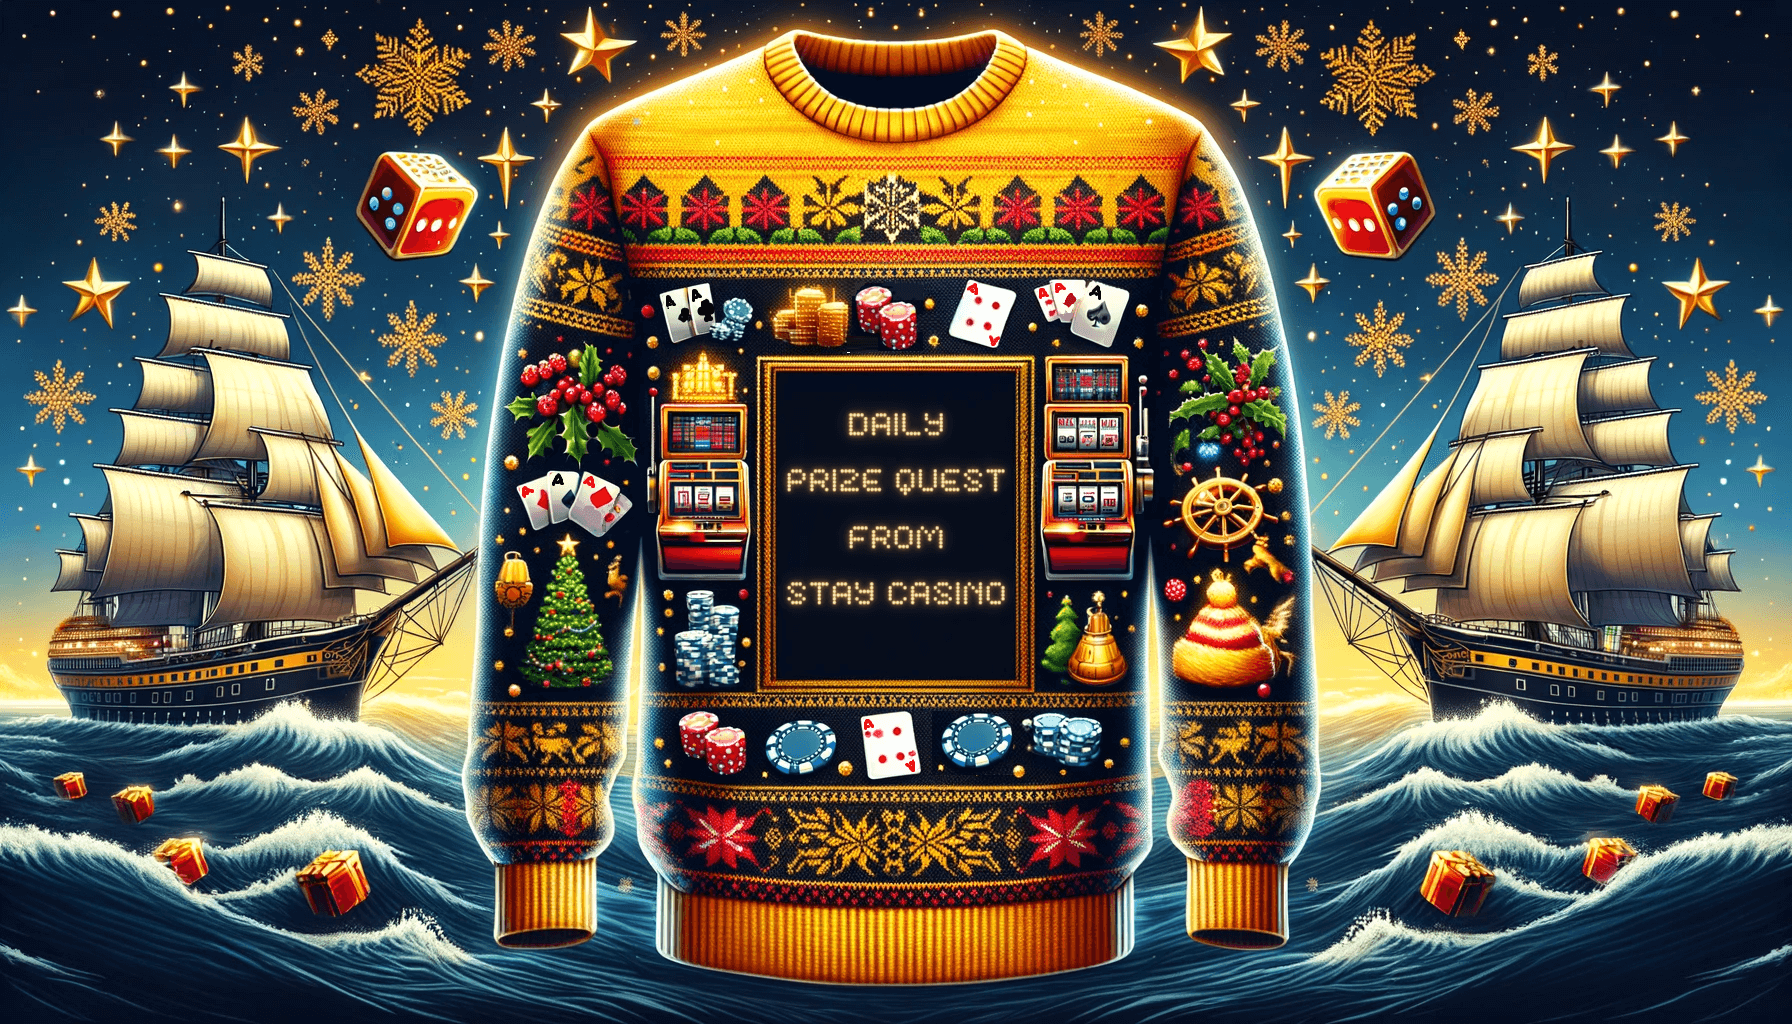 A Christmas sweater bearing the message: daily prize quest from Stay Casino